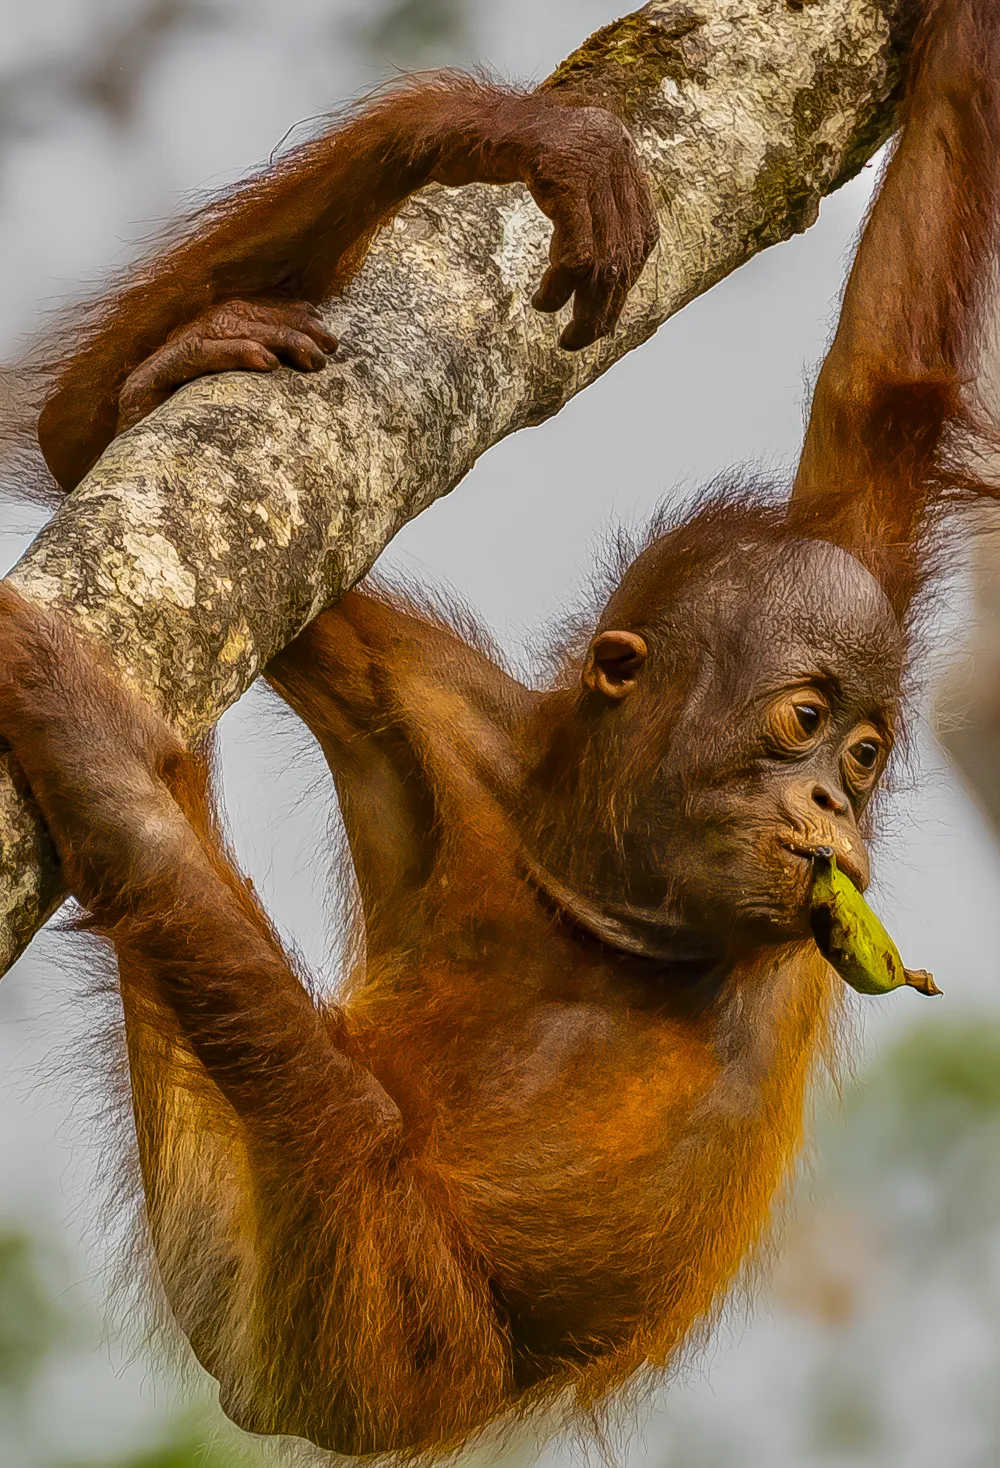 While on a photographic project Borneo, I noticed this young orangutan hanging in a tree alone while his mother was nearby. He had gotten a small banana and was looking for a place to settle and eat it.